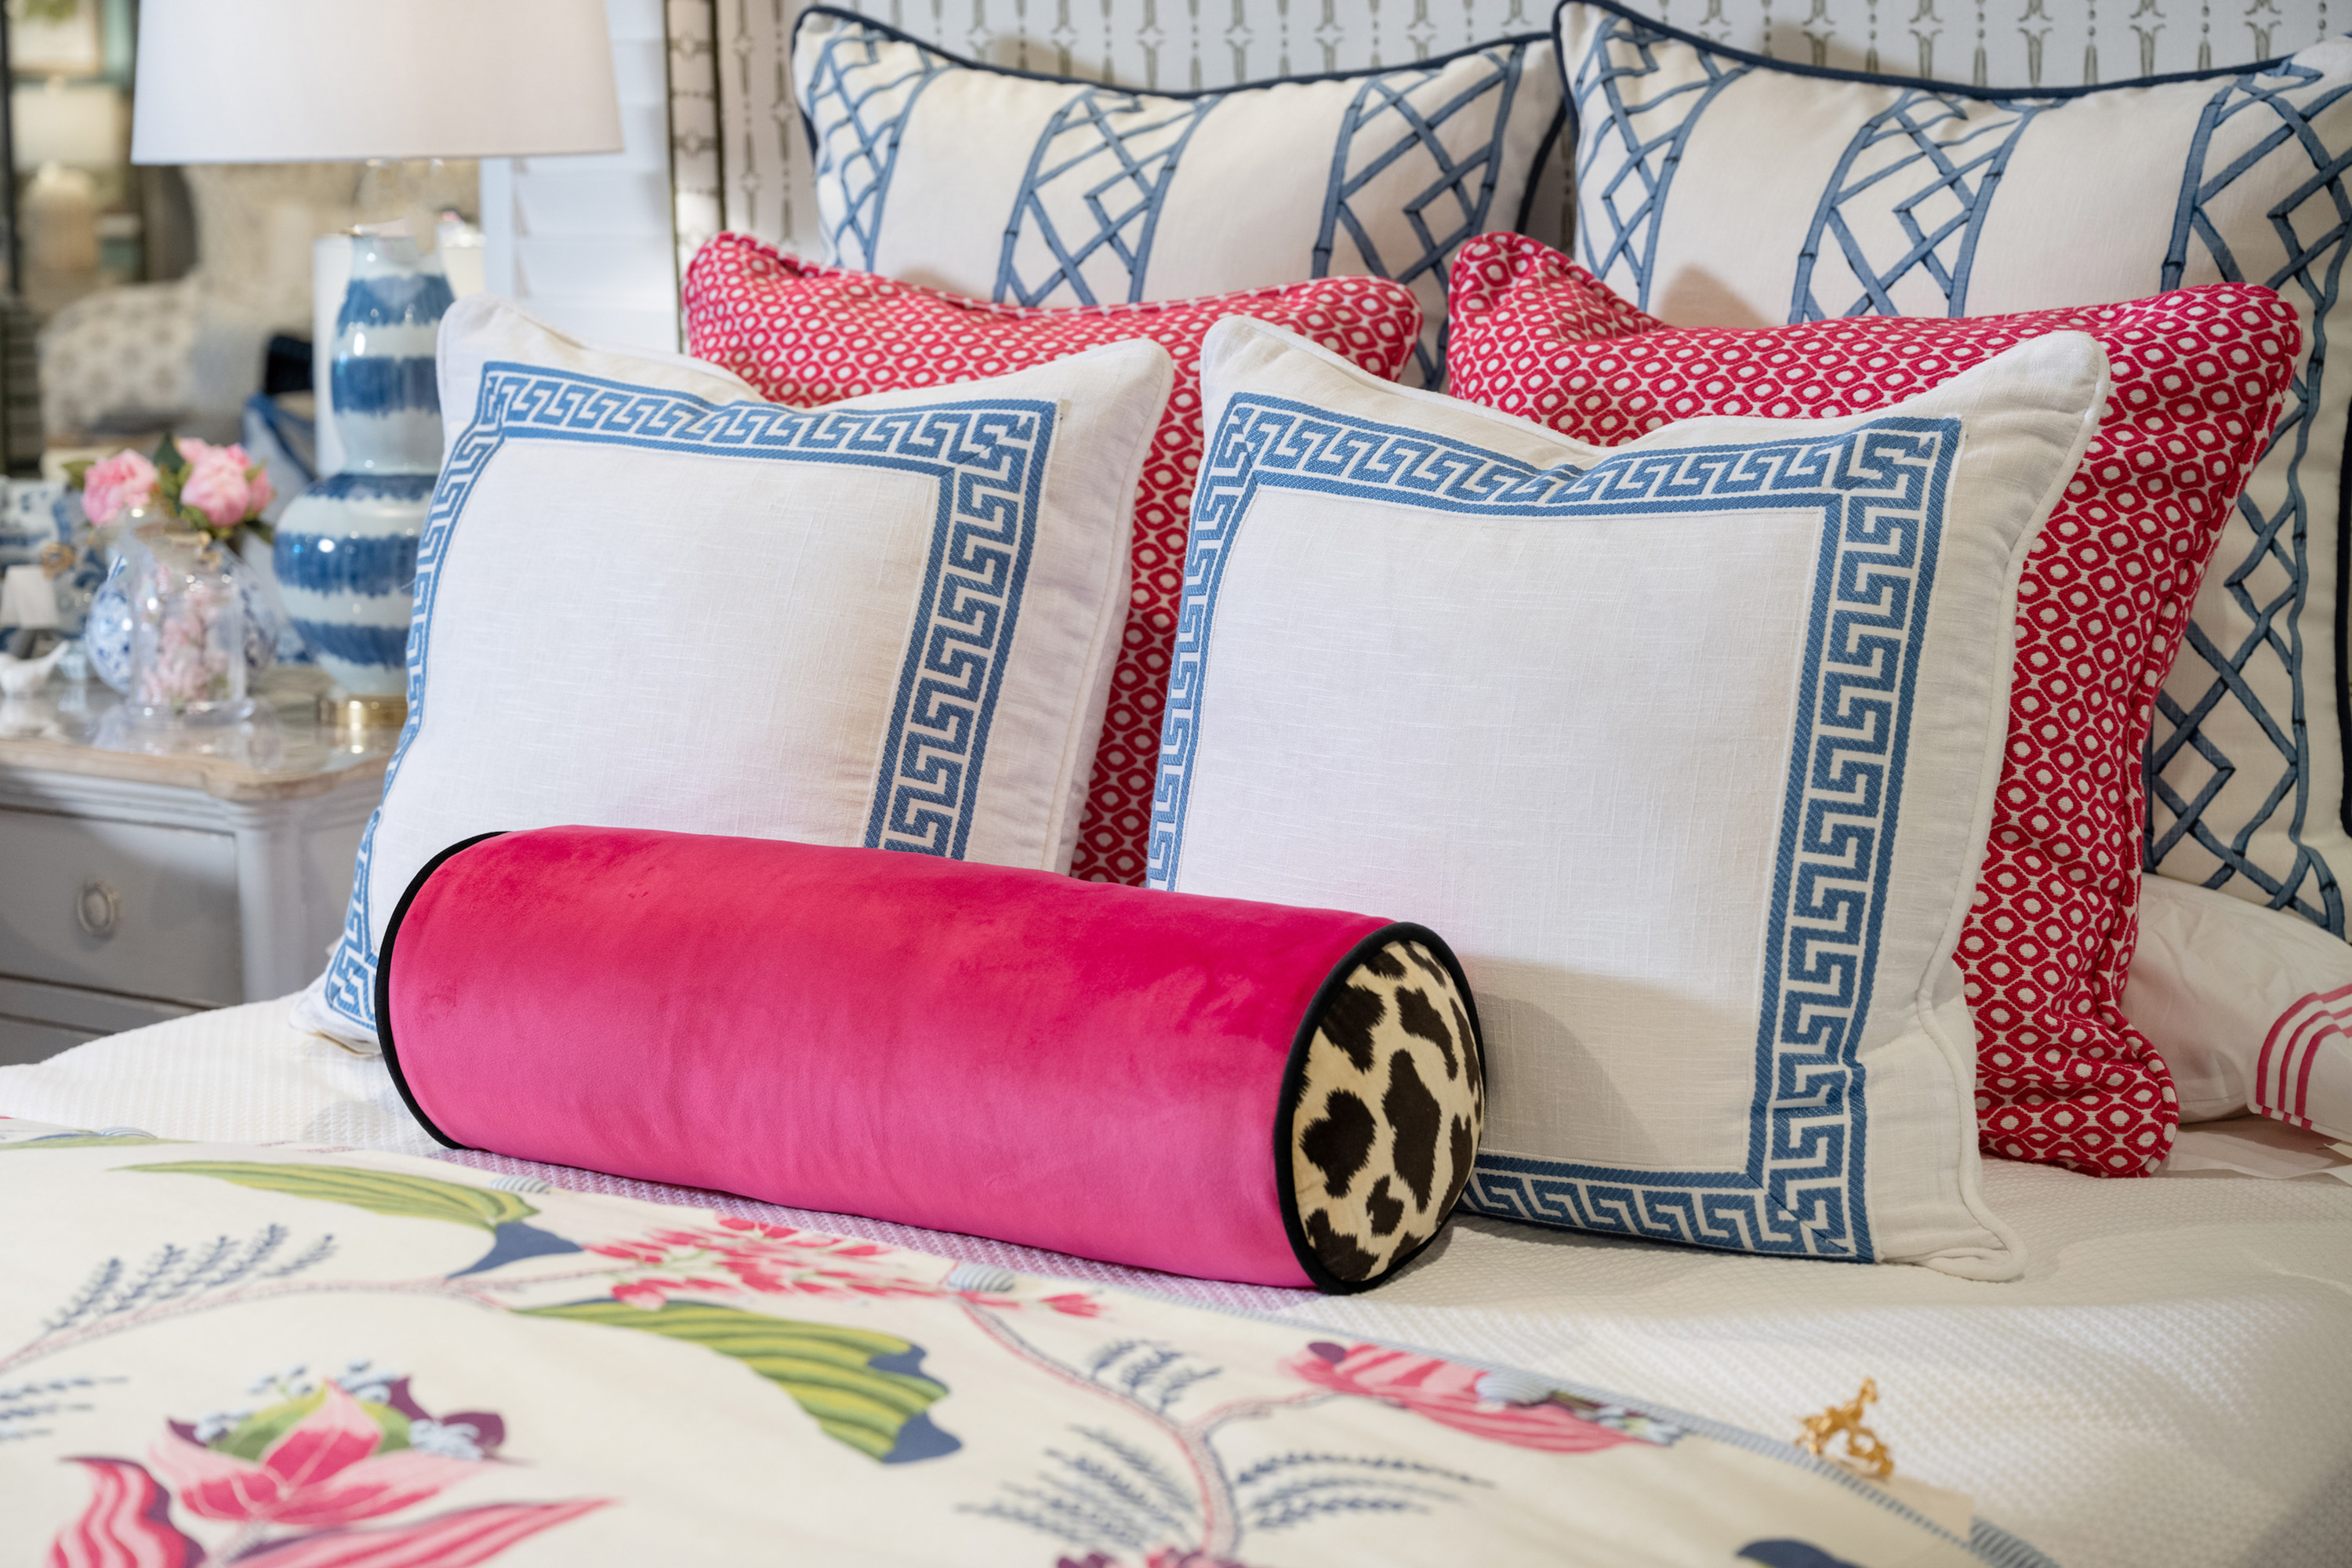 Pillows can feature contrasting trim or trim that blends; it's all about finding the right aesthetic for you.